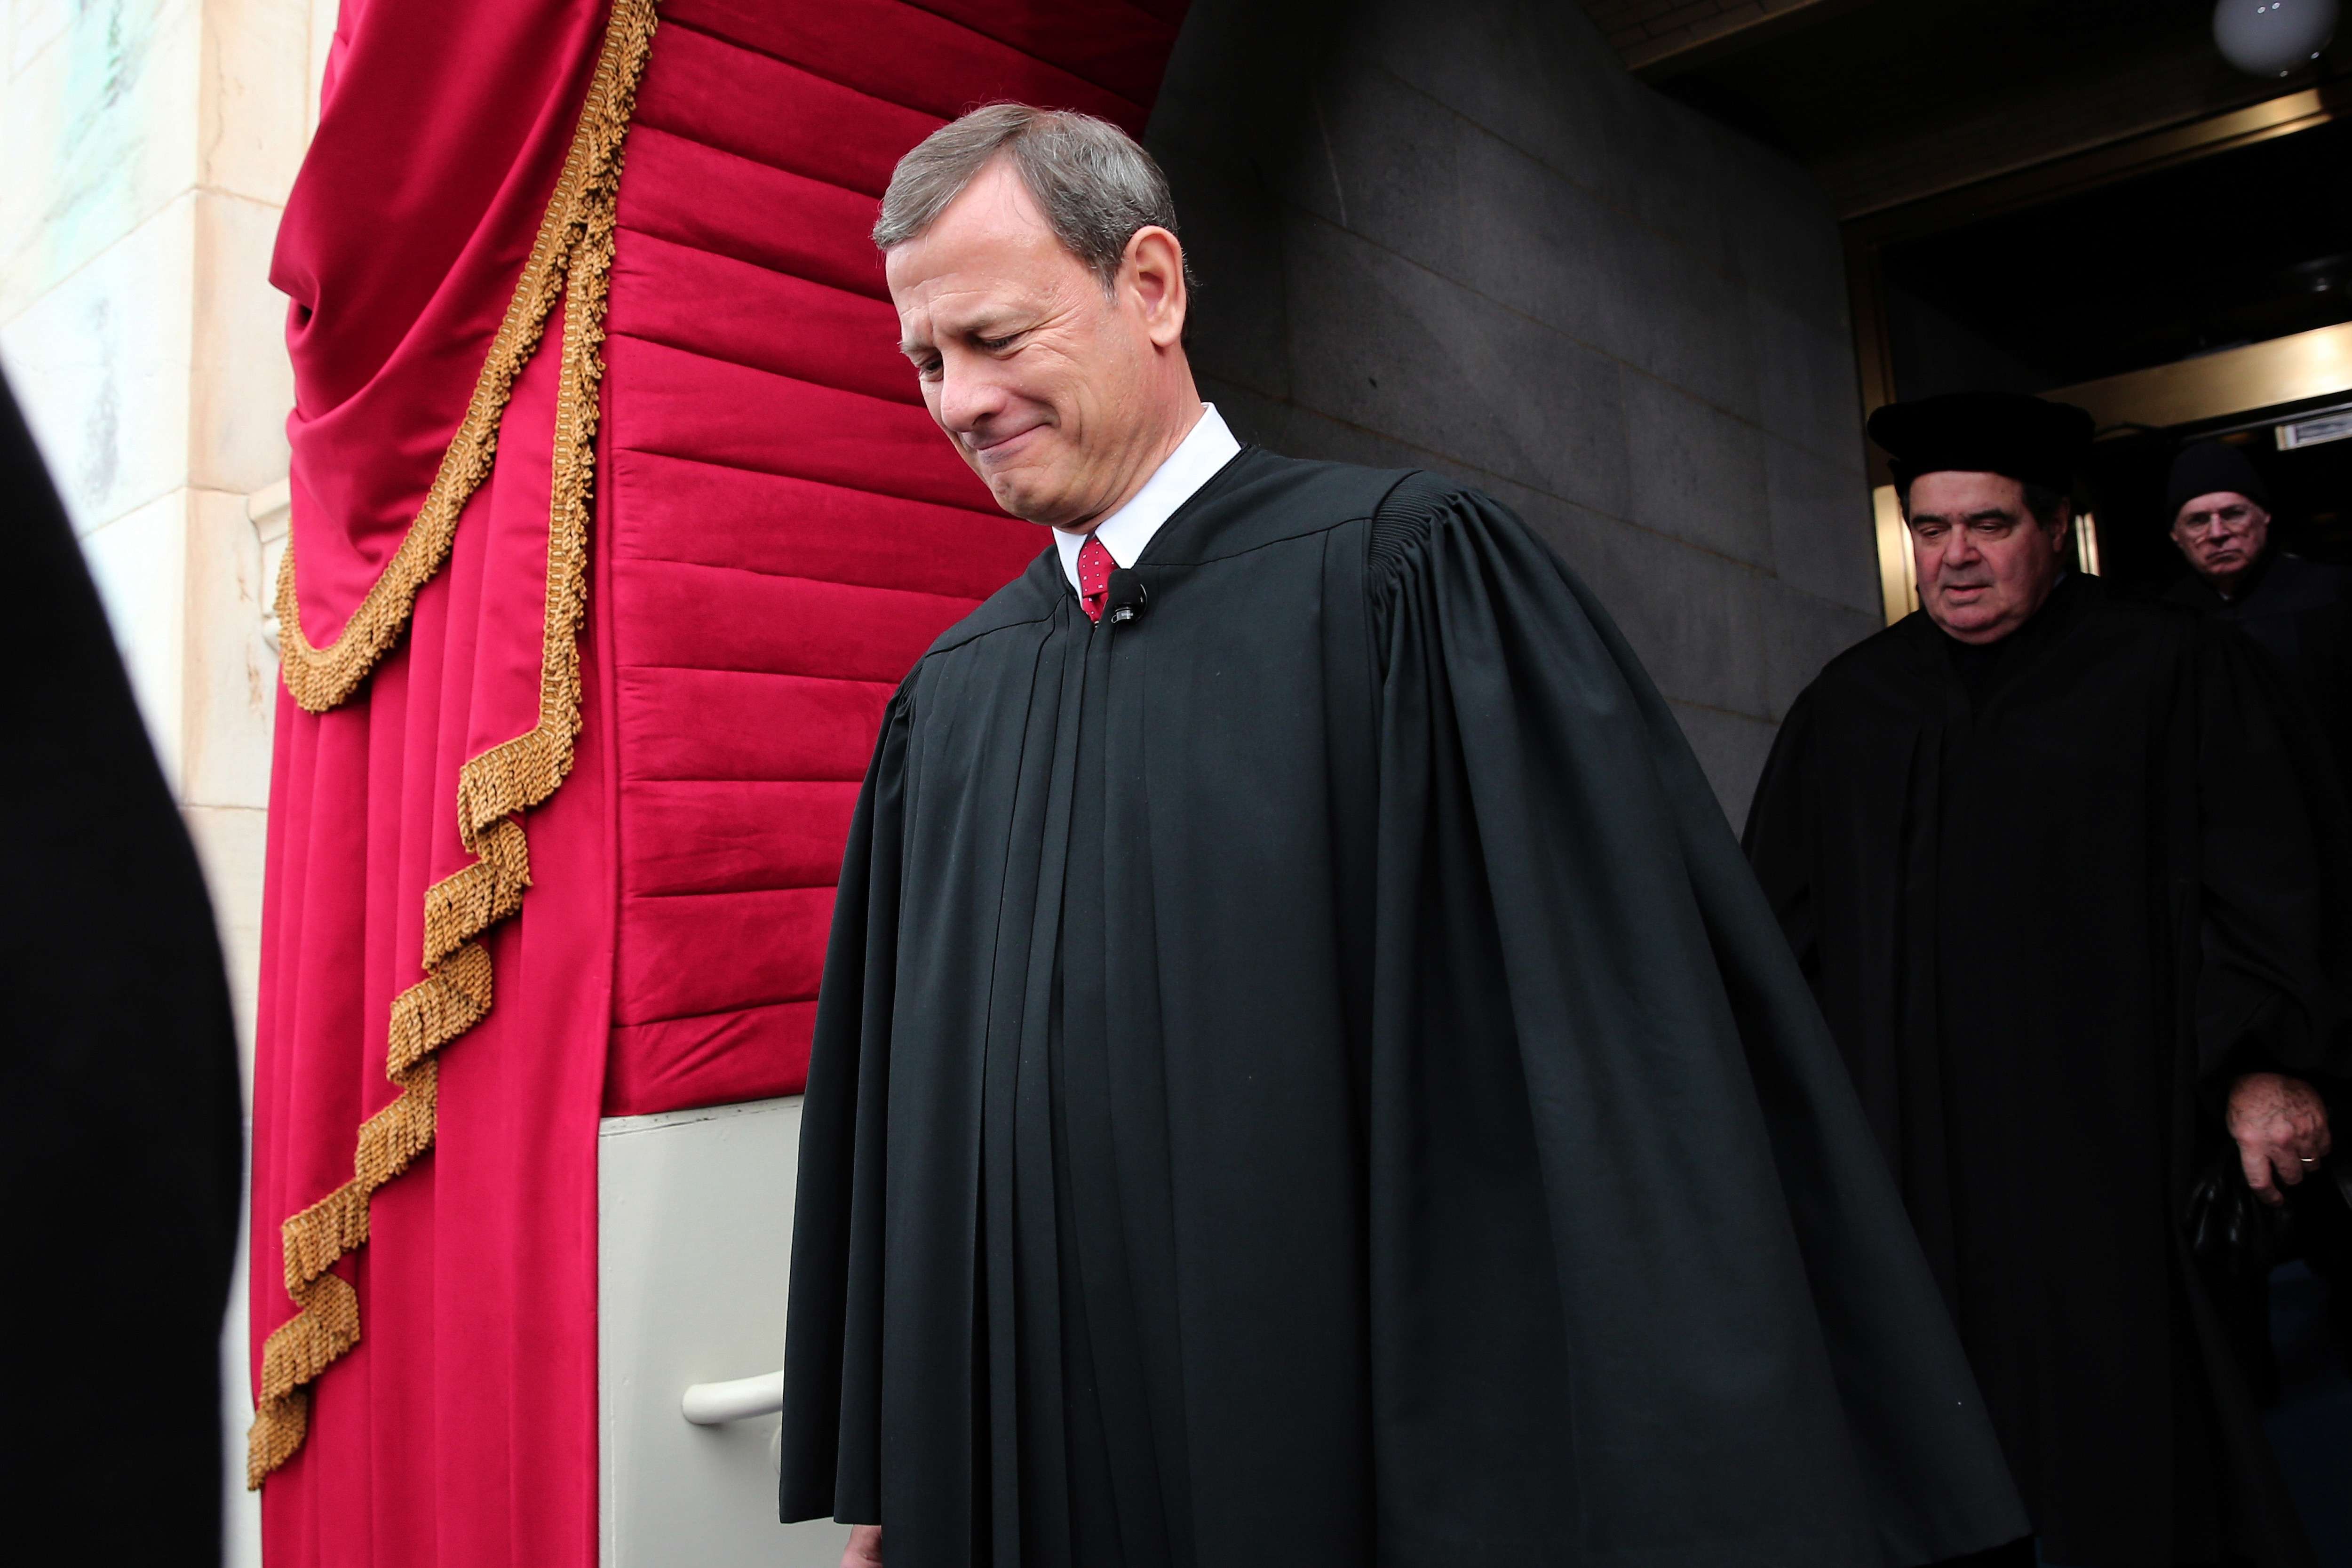 WASHINGTON, DC - JANUARY 21: Supreme Court Chief Justice John Roberts arrives during the presidential inauguration on the West Front of the U.S. Capitol January 21, 2013 in Washington, DC. Barack Obama was re-elected for a second term as President of the United States. (Photo by POOL Win McNamee/Getty Images)